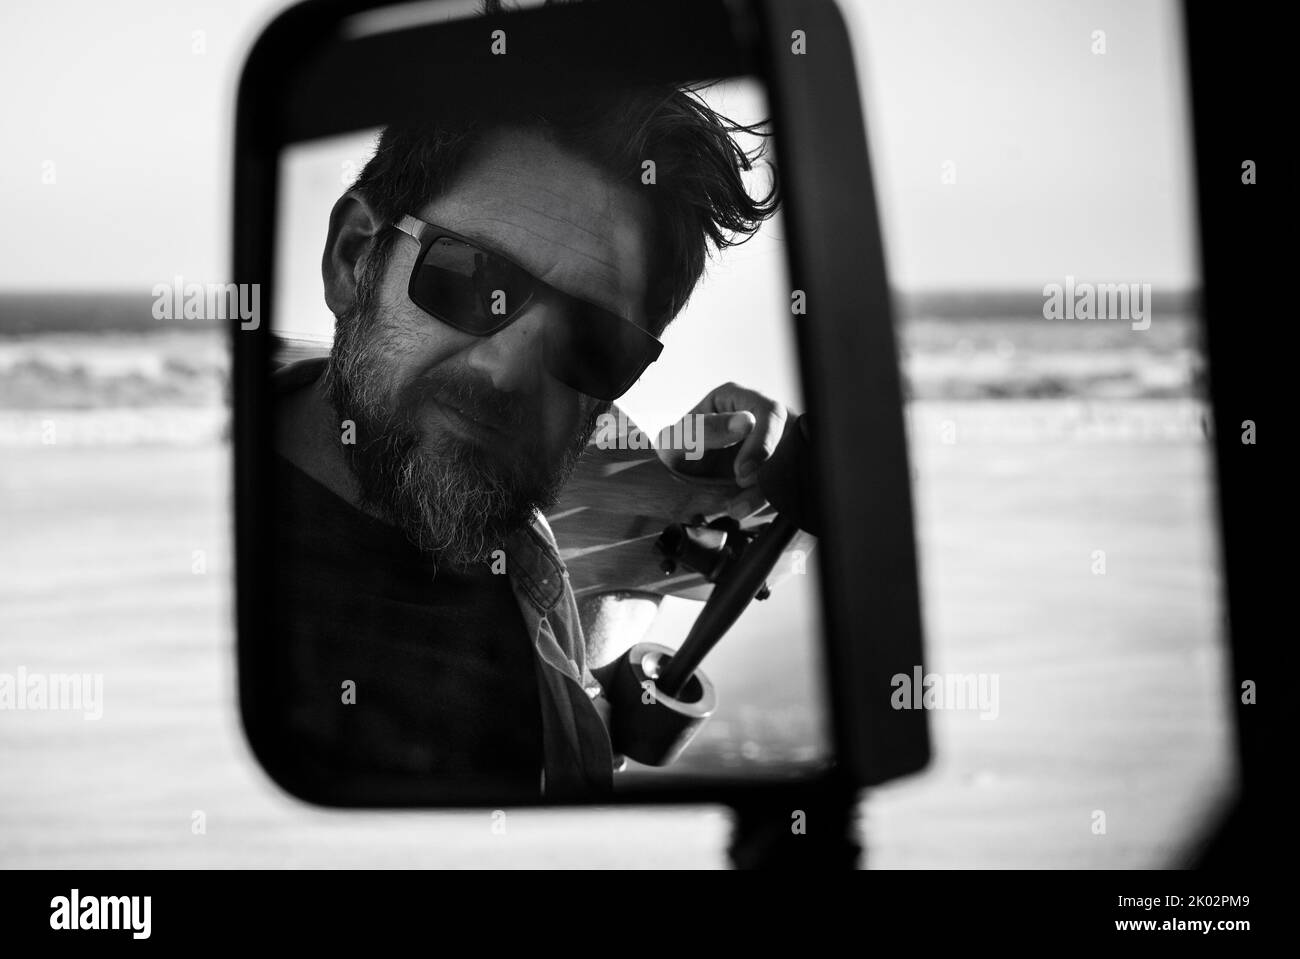 Black and white handsome man portrait in car vehicle mirror. Concept of adventure lifestyle and fashion beard style people. Adult mature model with sunglasses Stock Photo